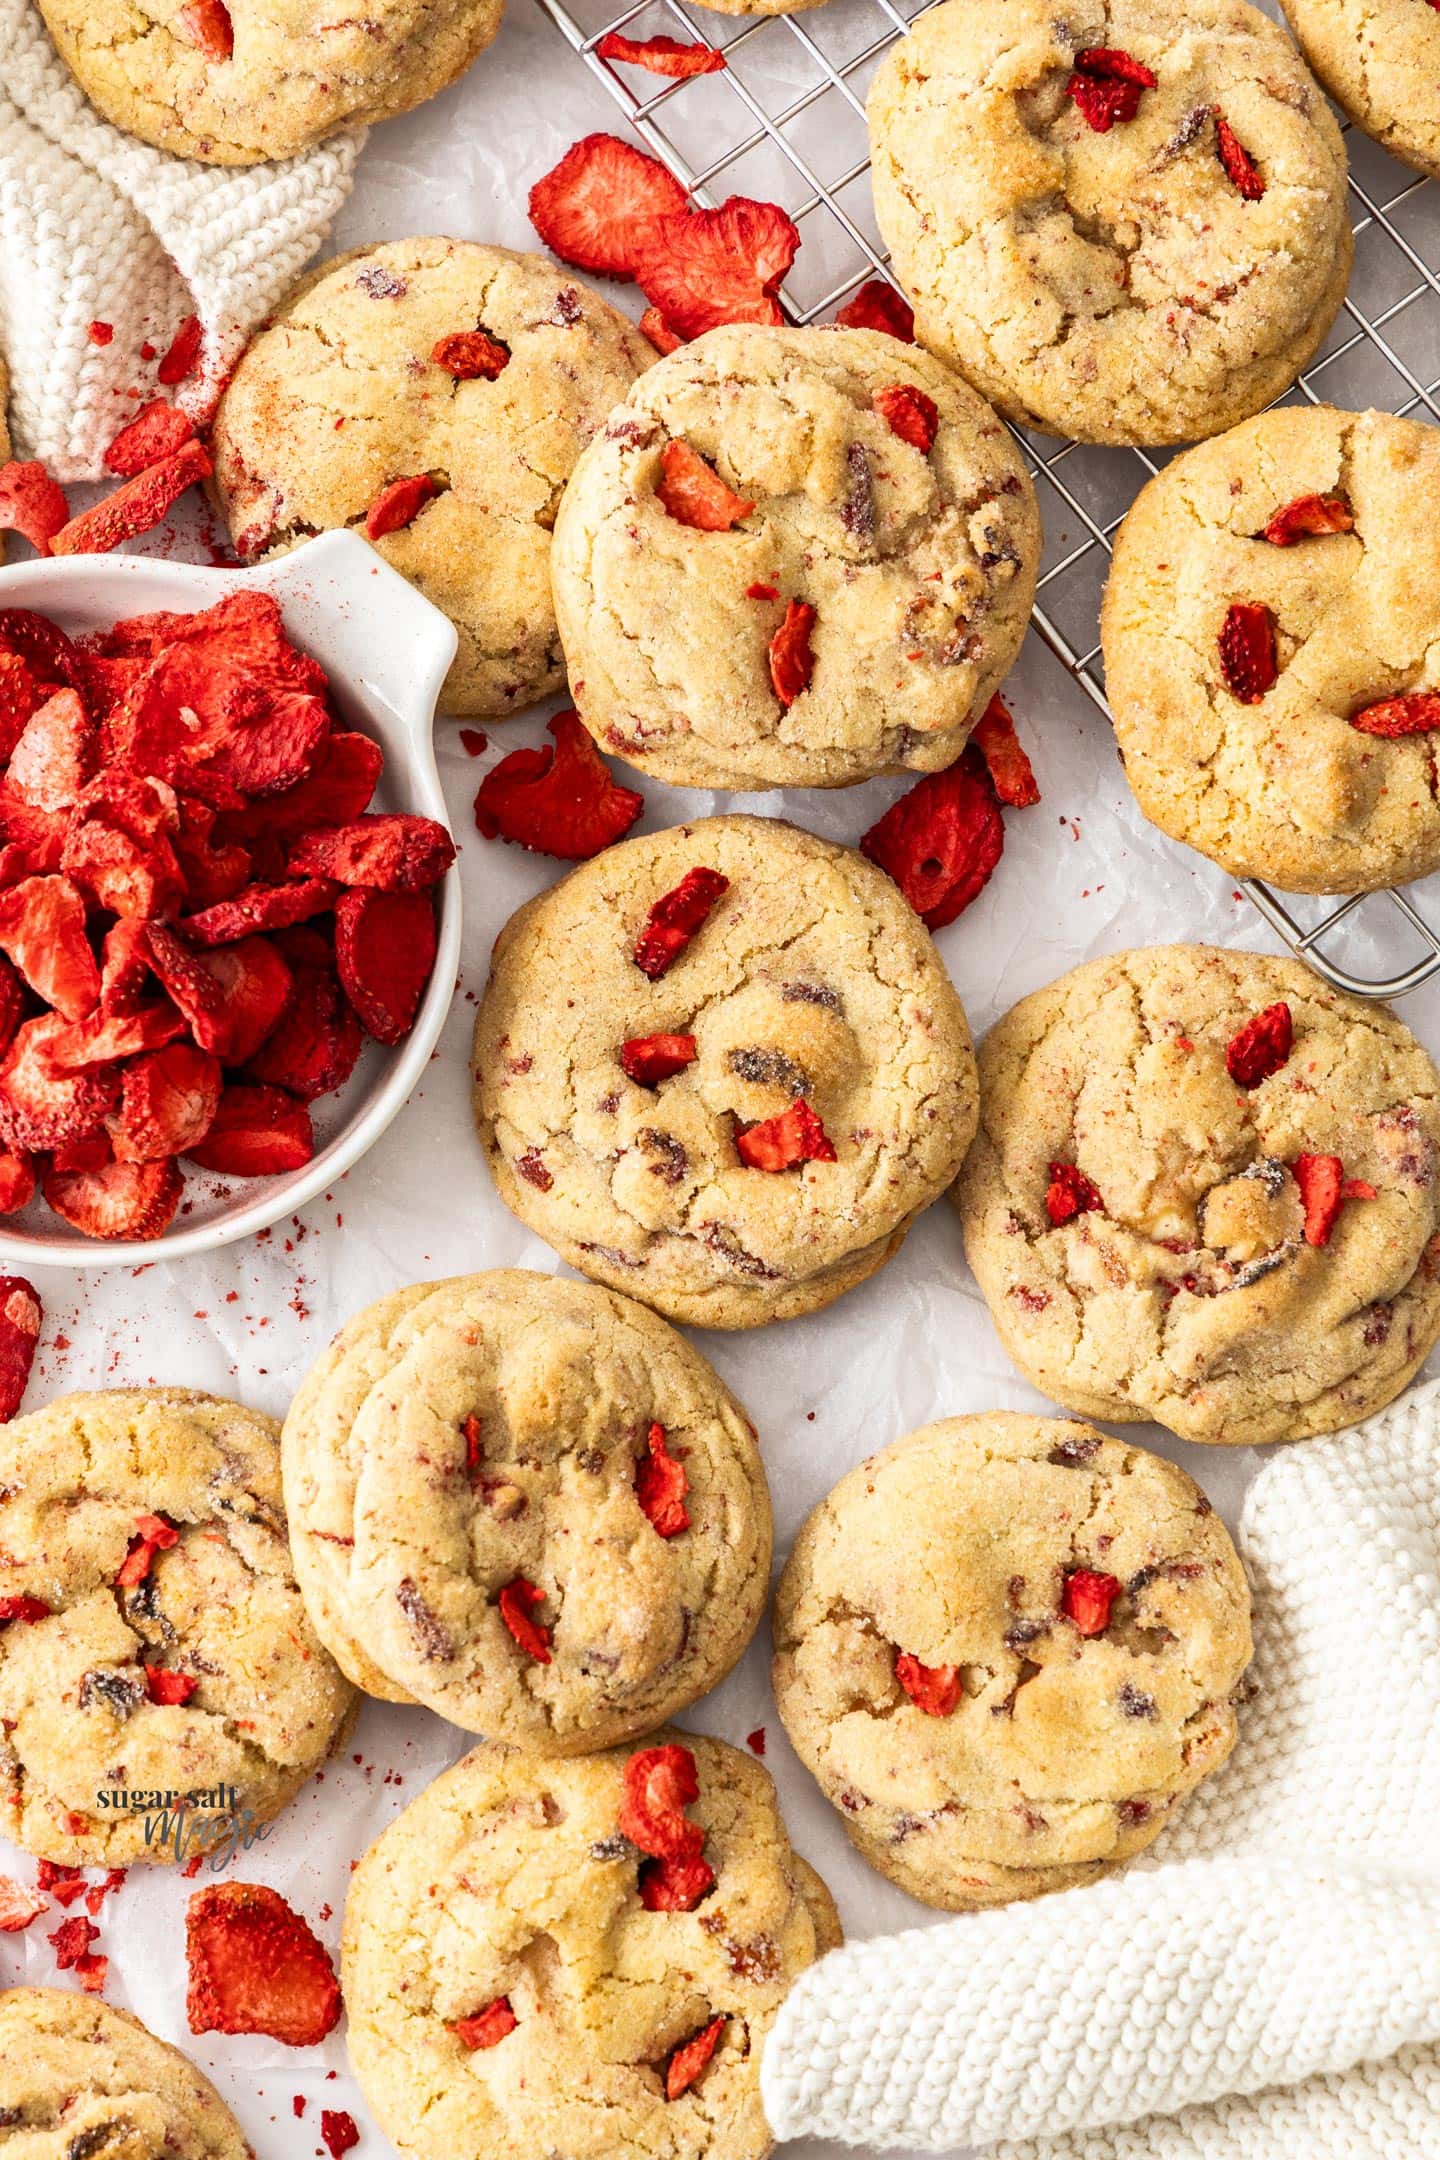 A batch of cheesecake stuffed cookies surrounded by freeze dried strawberries.